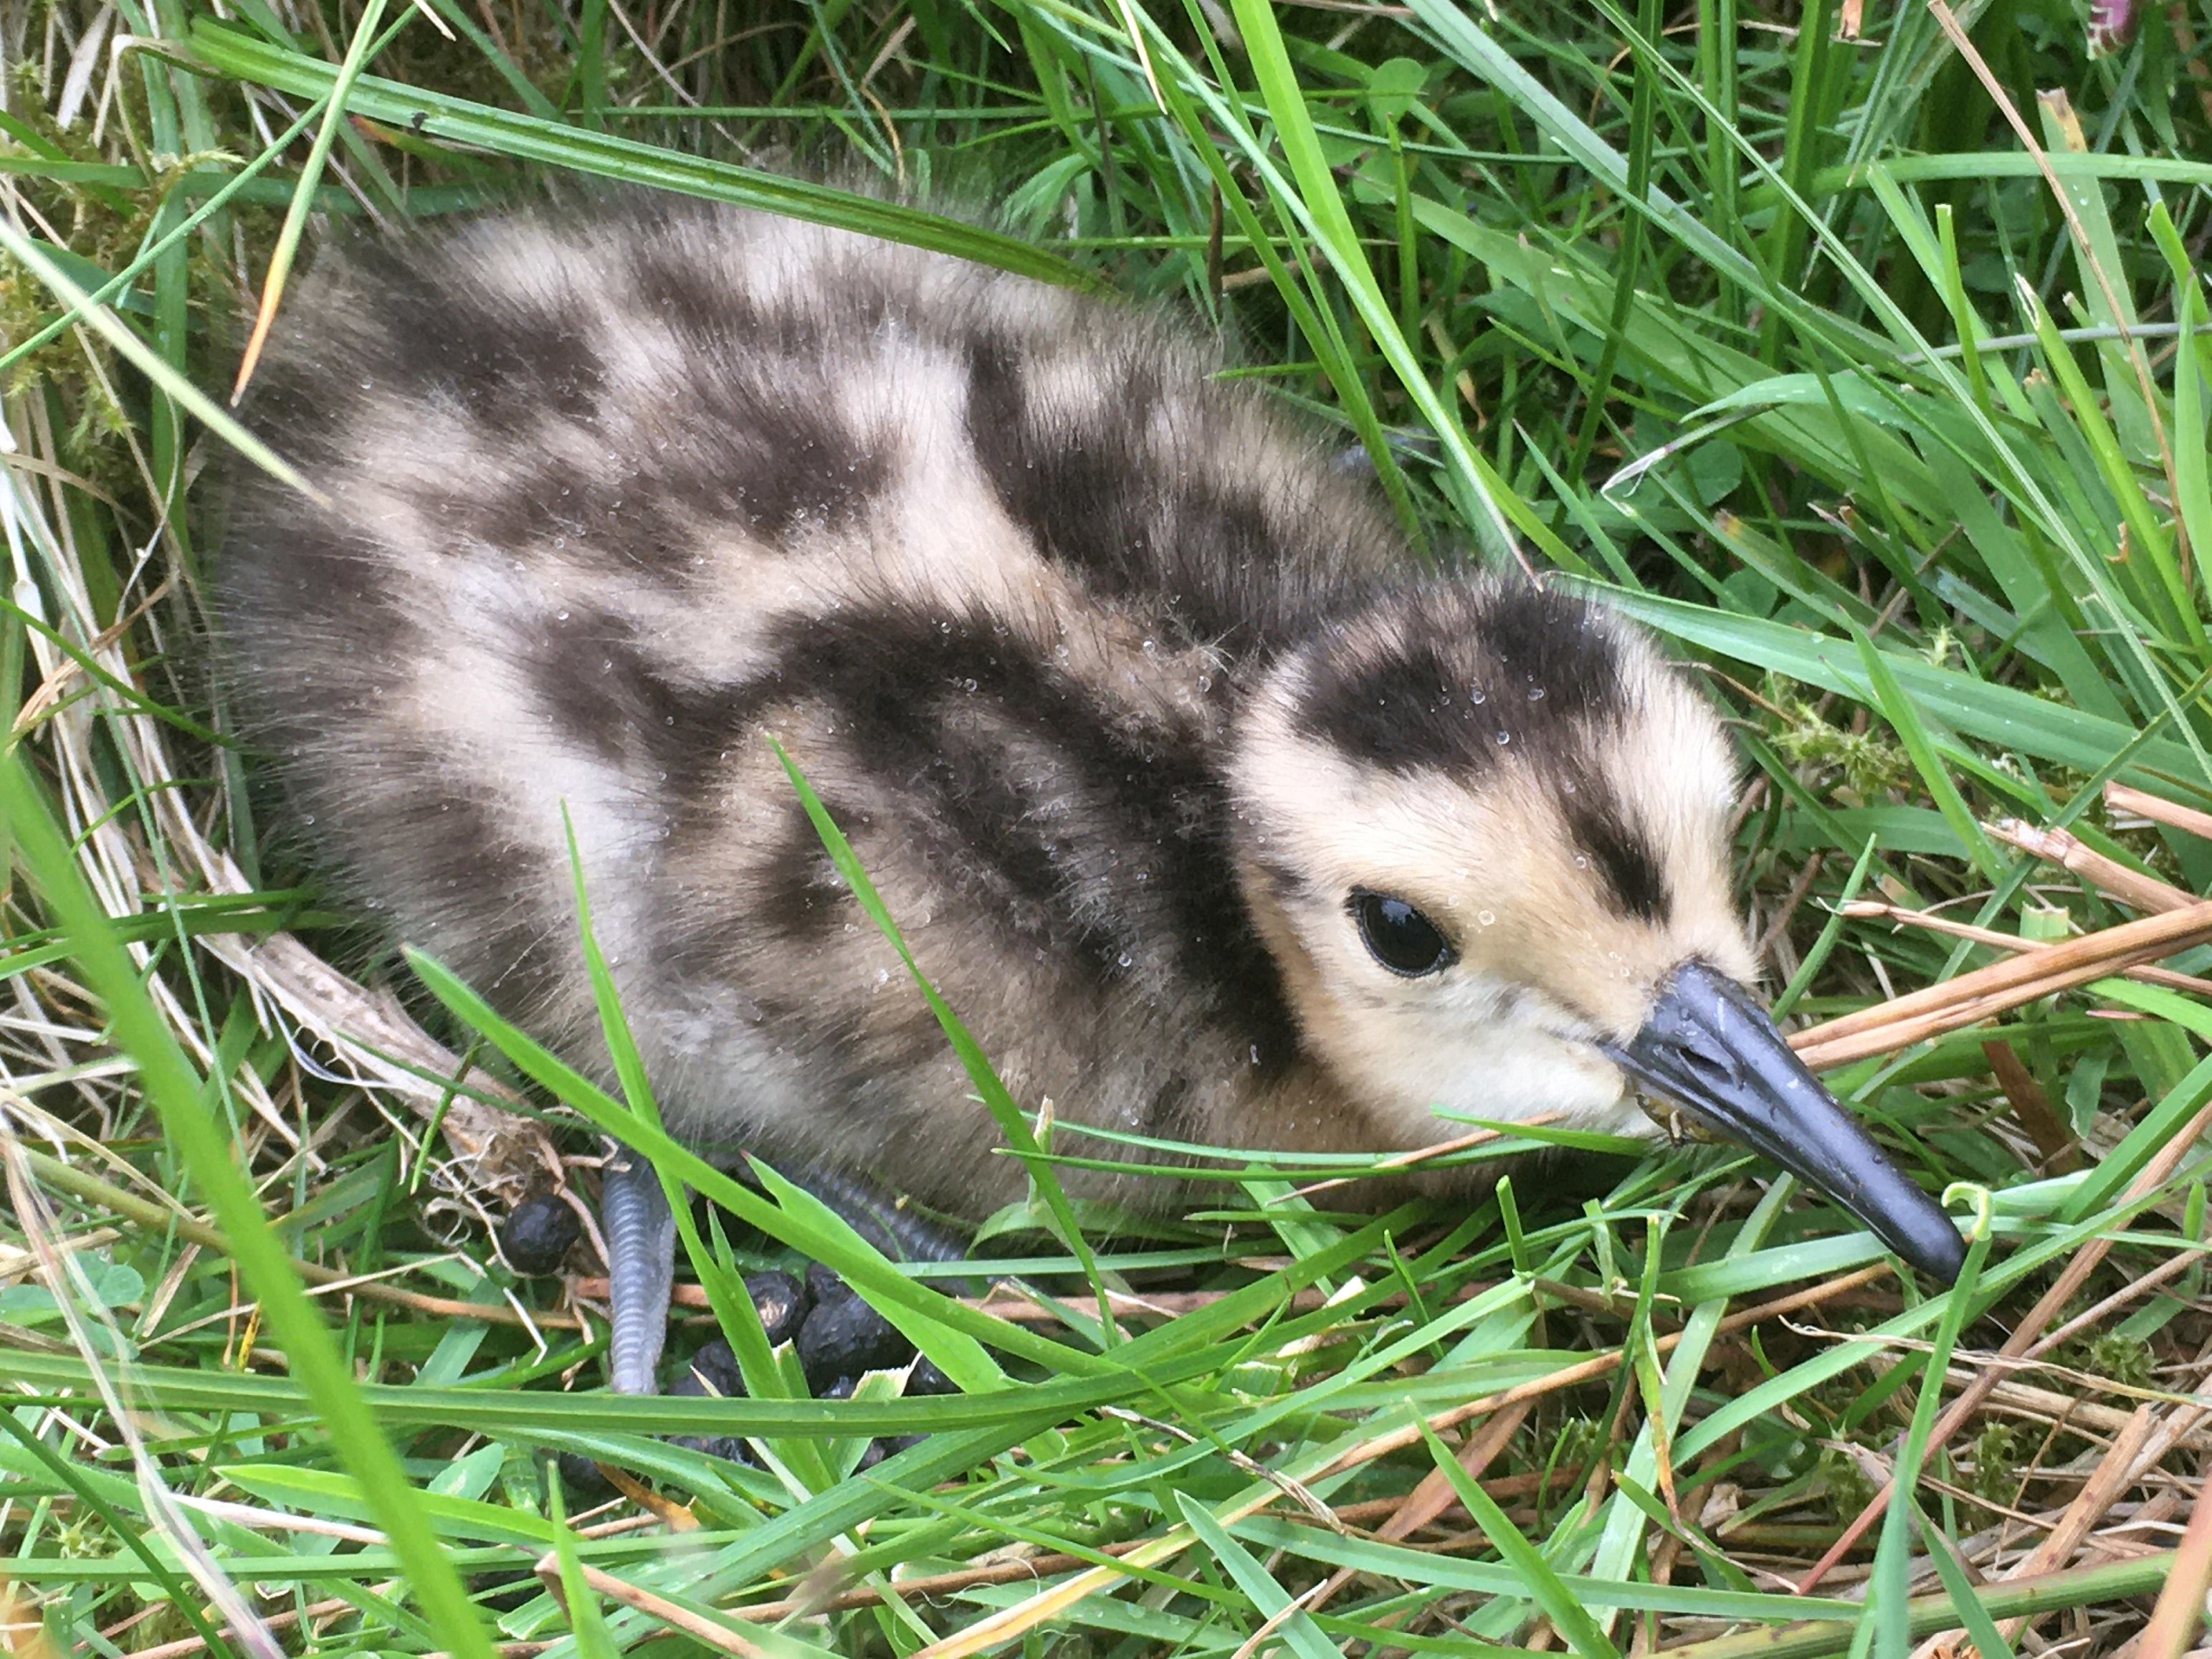 Curlew chick hiding in the grass